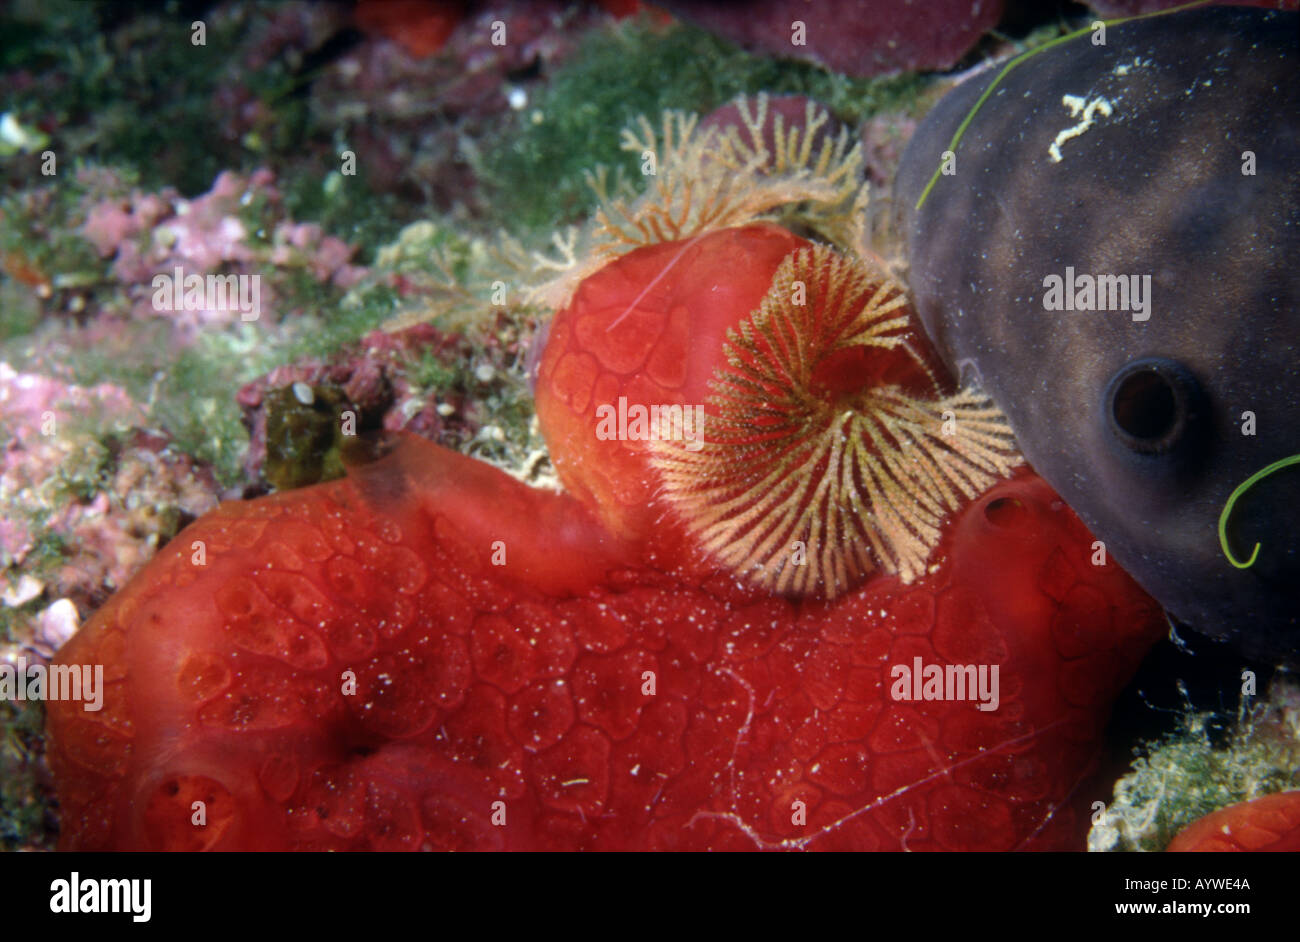 Red and black sponges, golden lace coral, encrusting algae of various hues in the background: colors and textures under the sea. Stock Photo